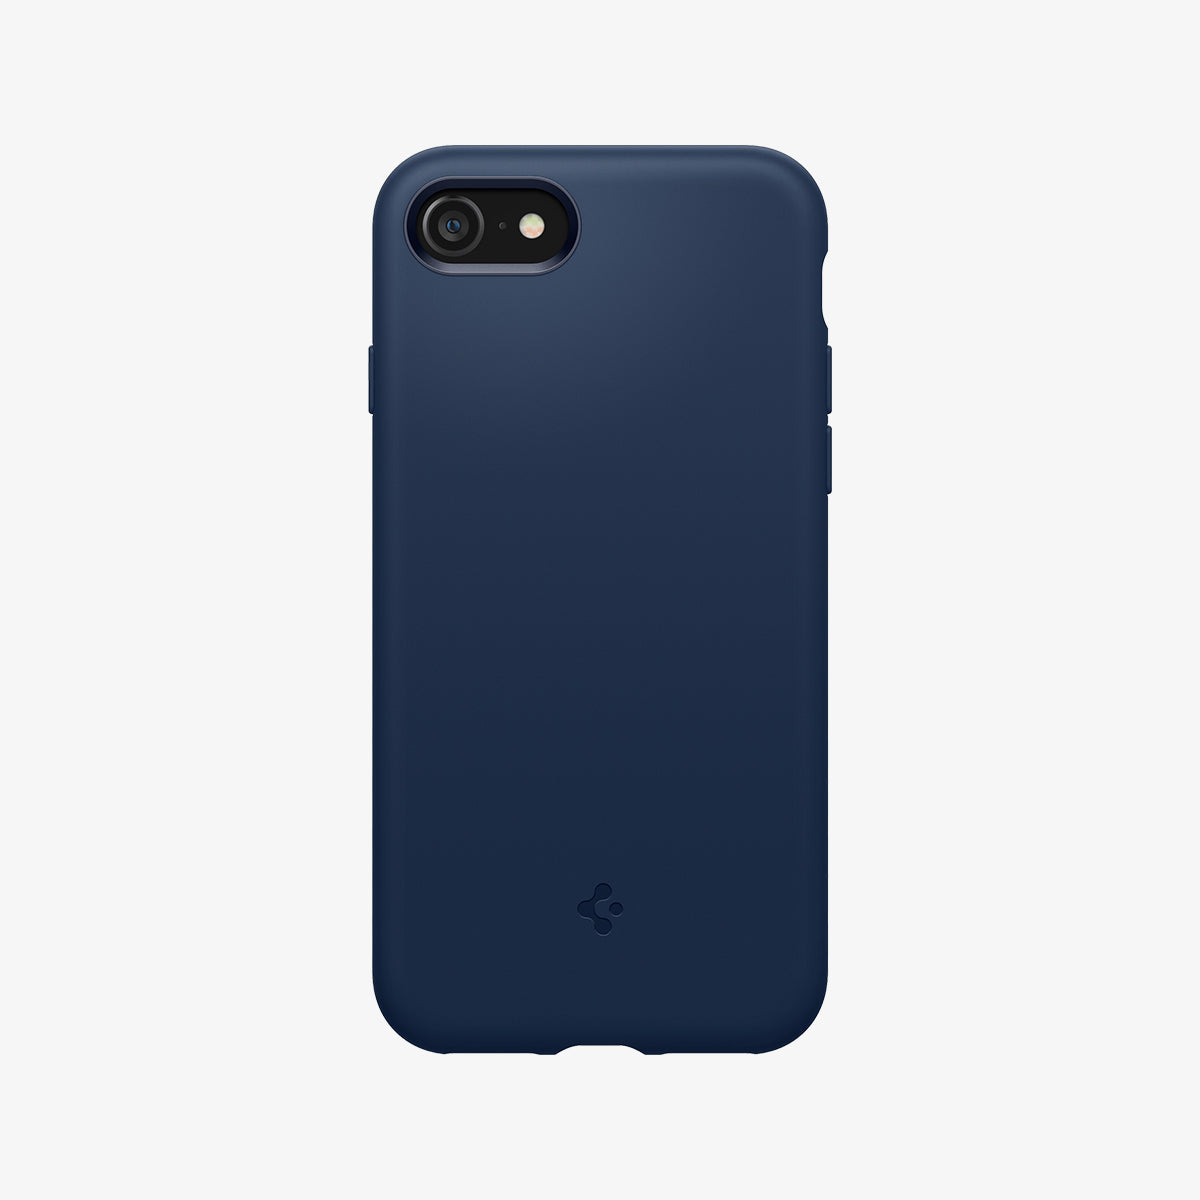 ACS04350 - iPhone SE Silicone Fit case in navy showing the back